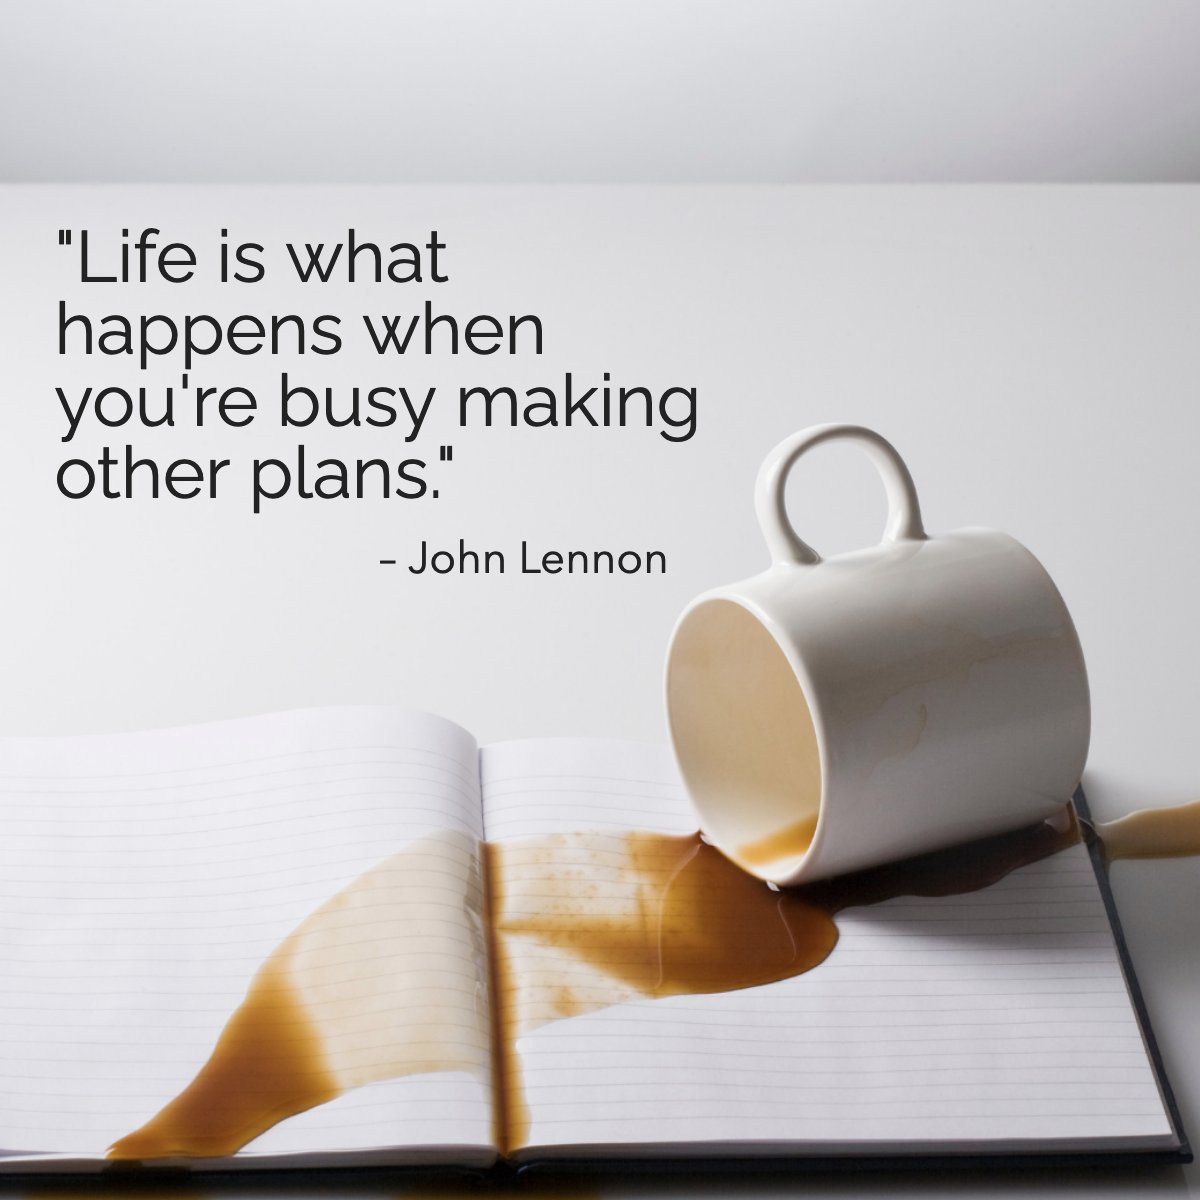 Did you know this famous quote is from John Lennon?

#inspiring #plans #quote #johnlennon #life
 #veteranhomebuyers #militaryhomebuyers #veteransellinghome #militarysellinghome #PCSmove #militaryPCS #veteranrealtor #militaryrealtor #veteranownedrealestate